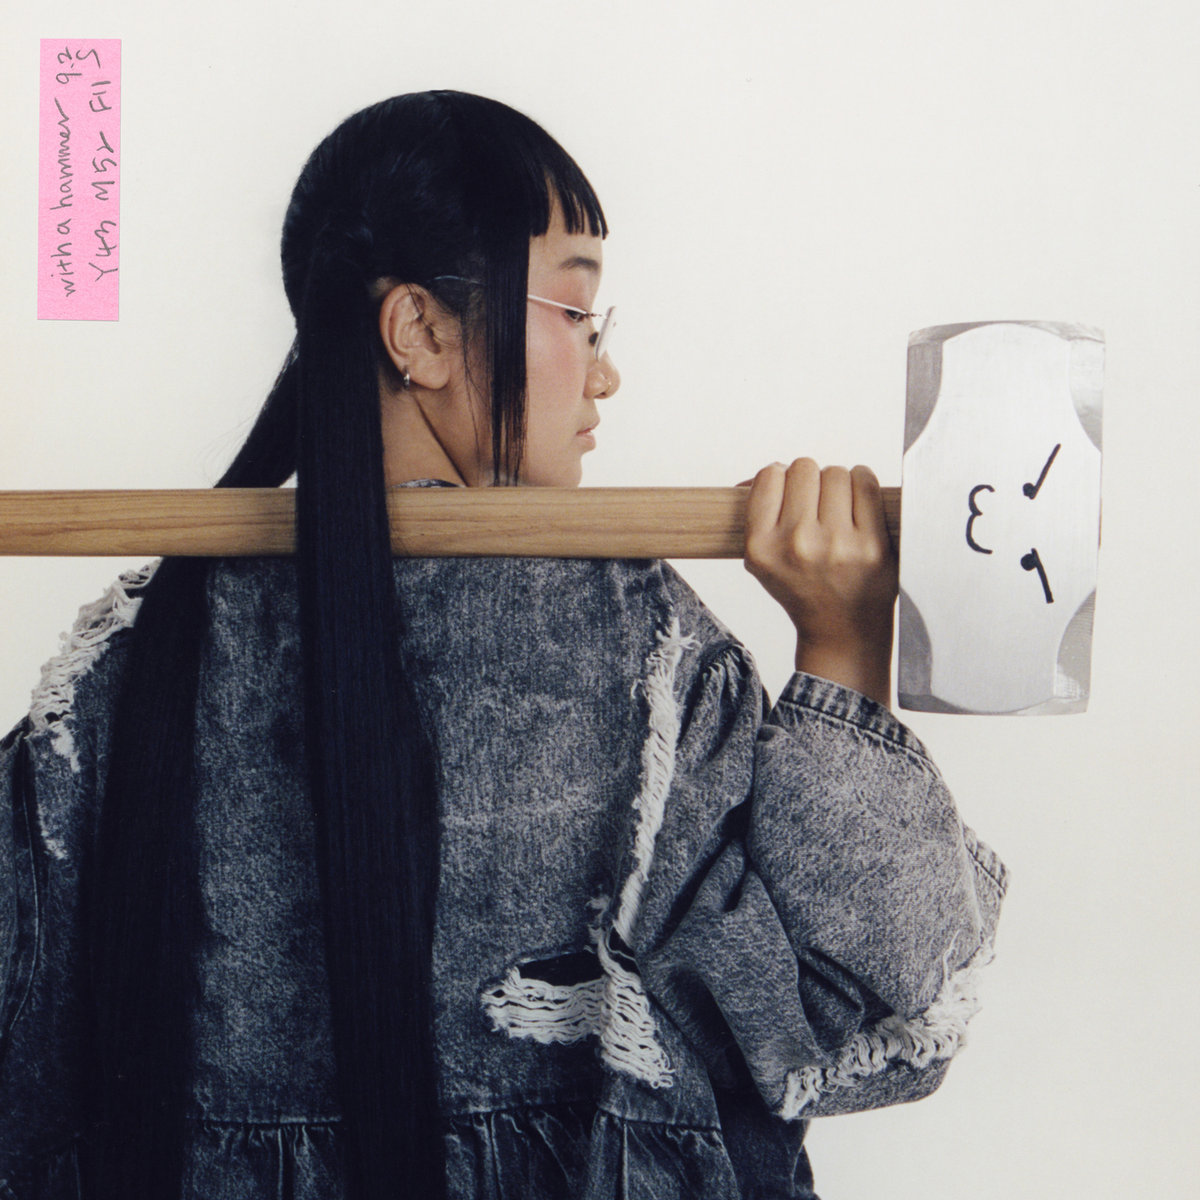 Yaeji holds a sledgehammer with a smirking face drawn on it. She looks cool as hell.